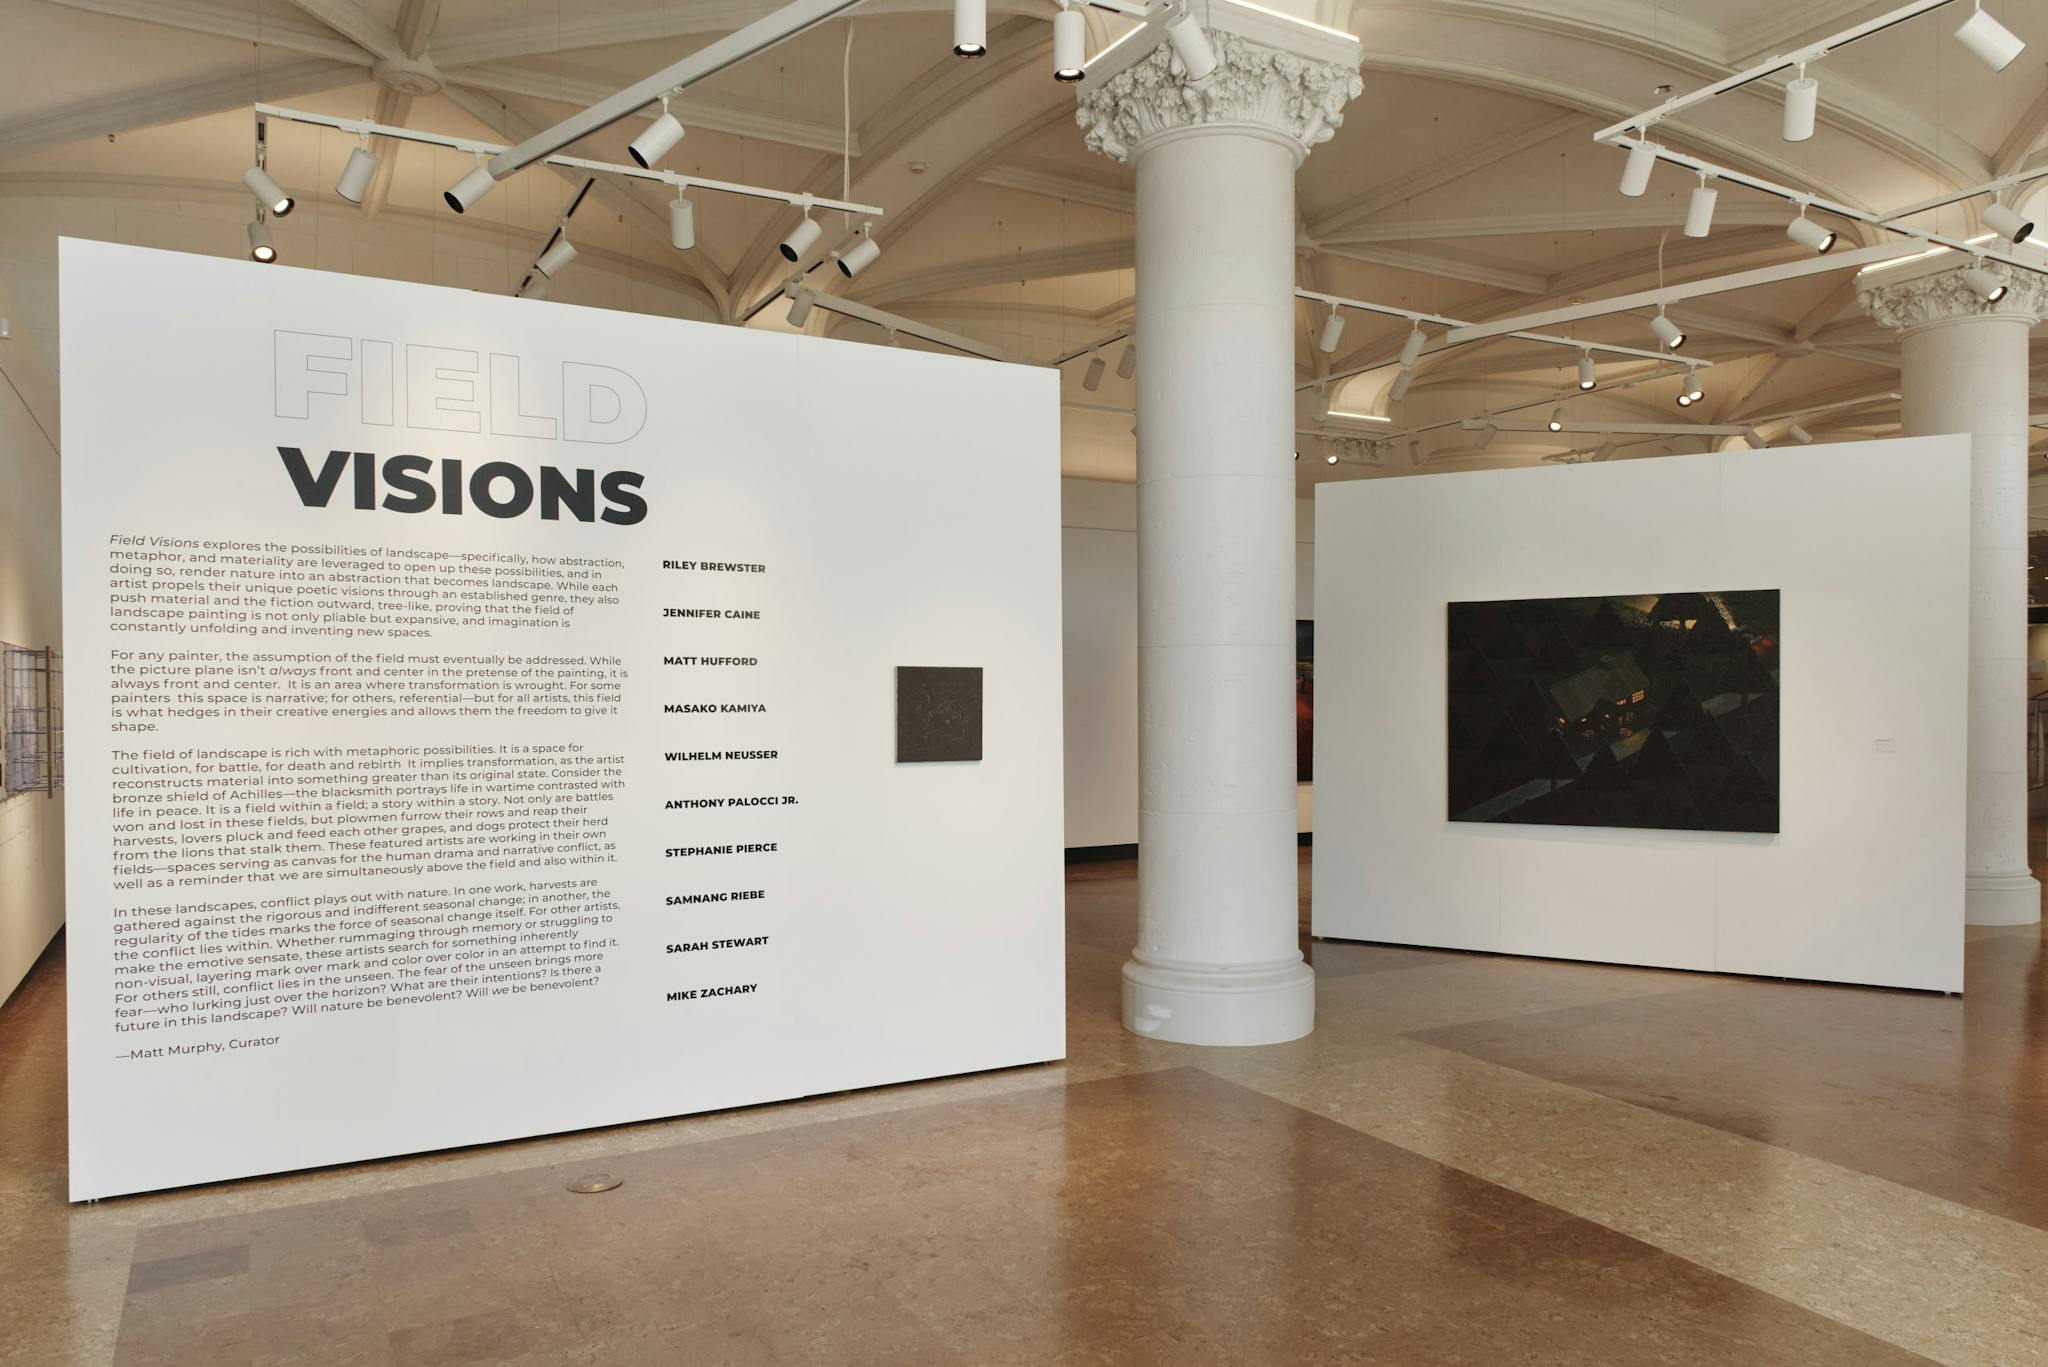 On a large white board positioned in front of a Greek column, text explains the "Field Visions" exhibit.